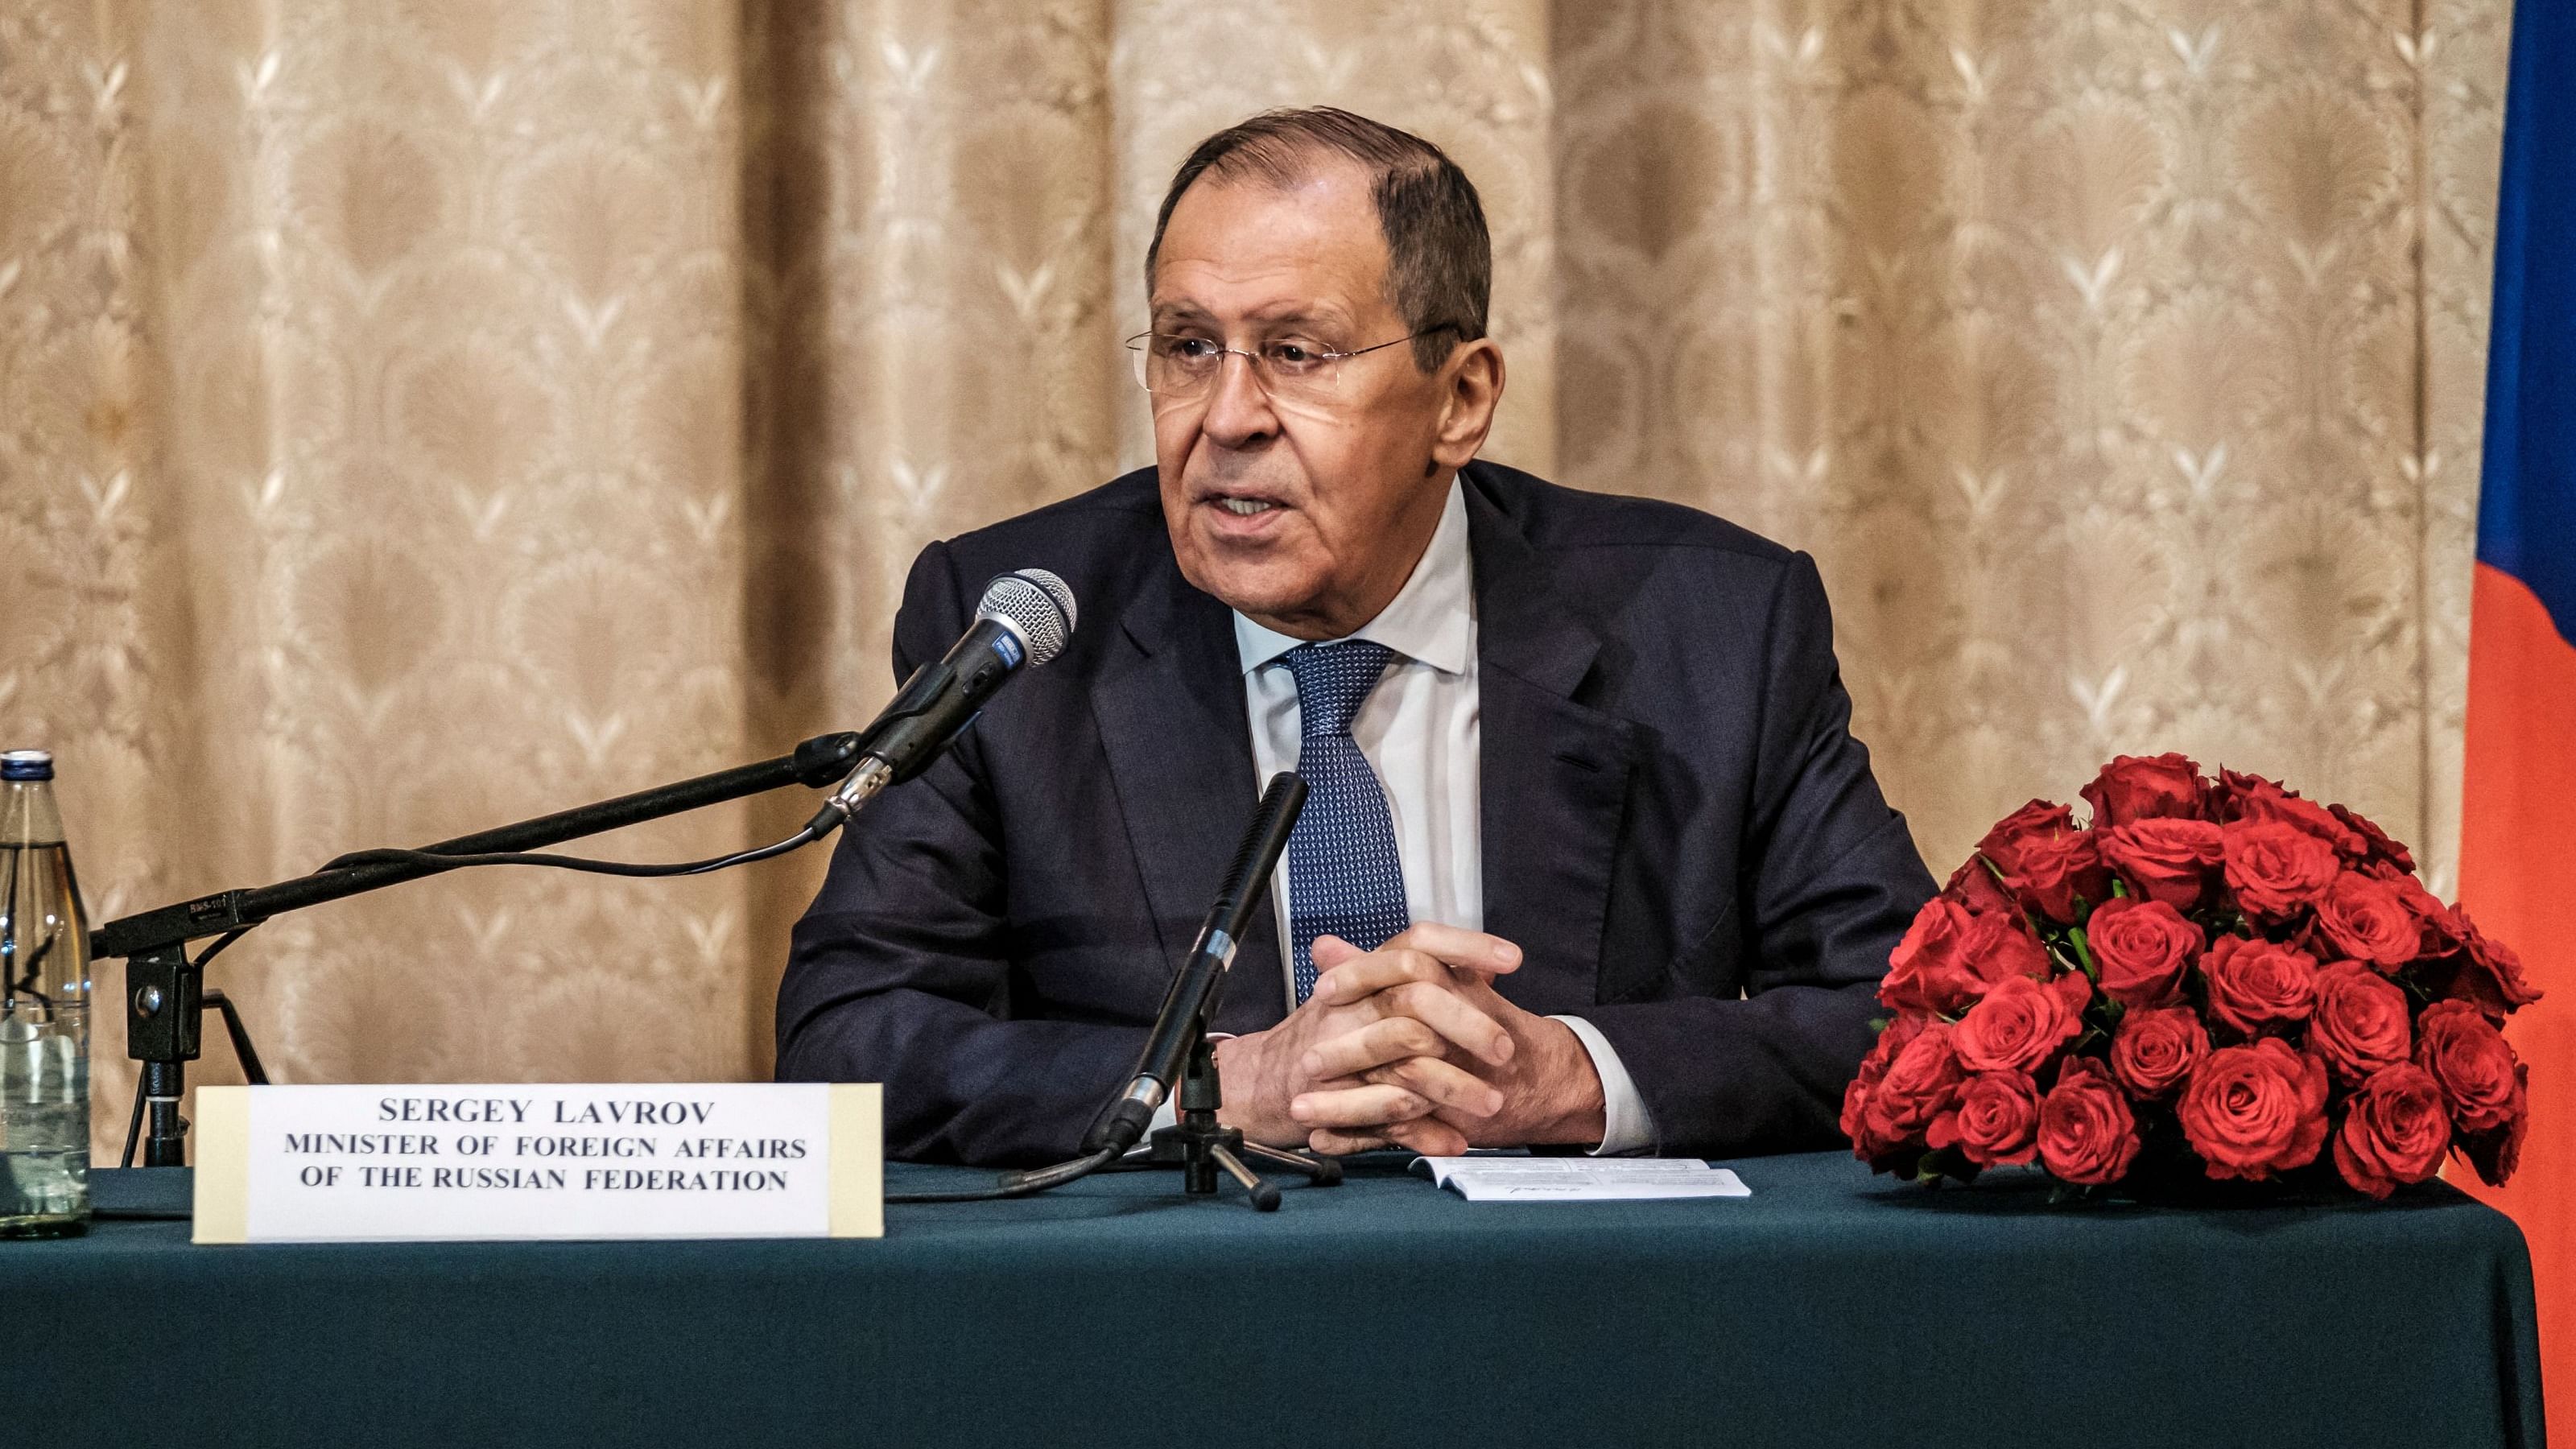 Sergey Lavrov, minister of foreign affairs of the Russian Federation, addresses the public during a press conference at the Russian embassy, in Addis Ababa, Ethiopia. Credit: AFP Photo